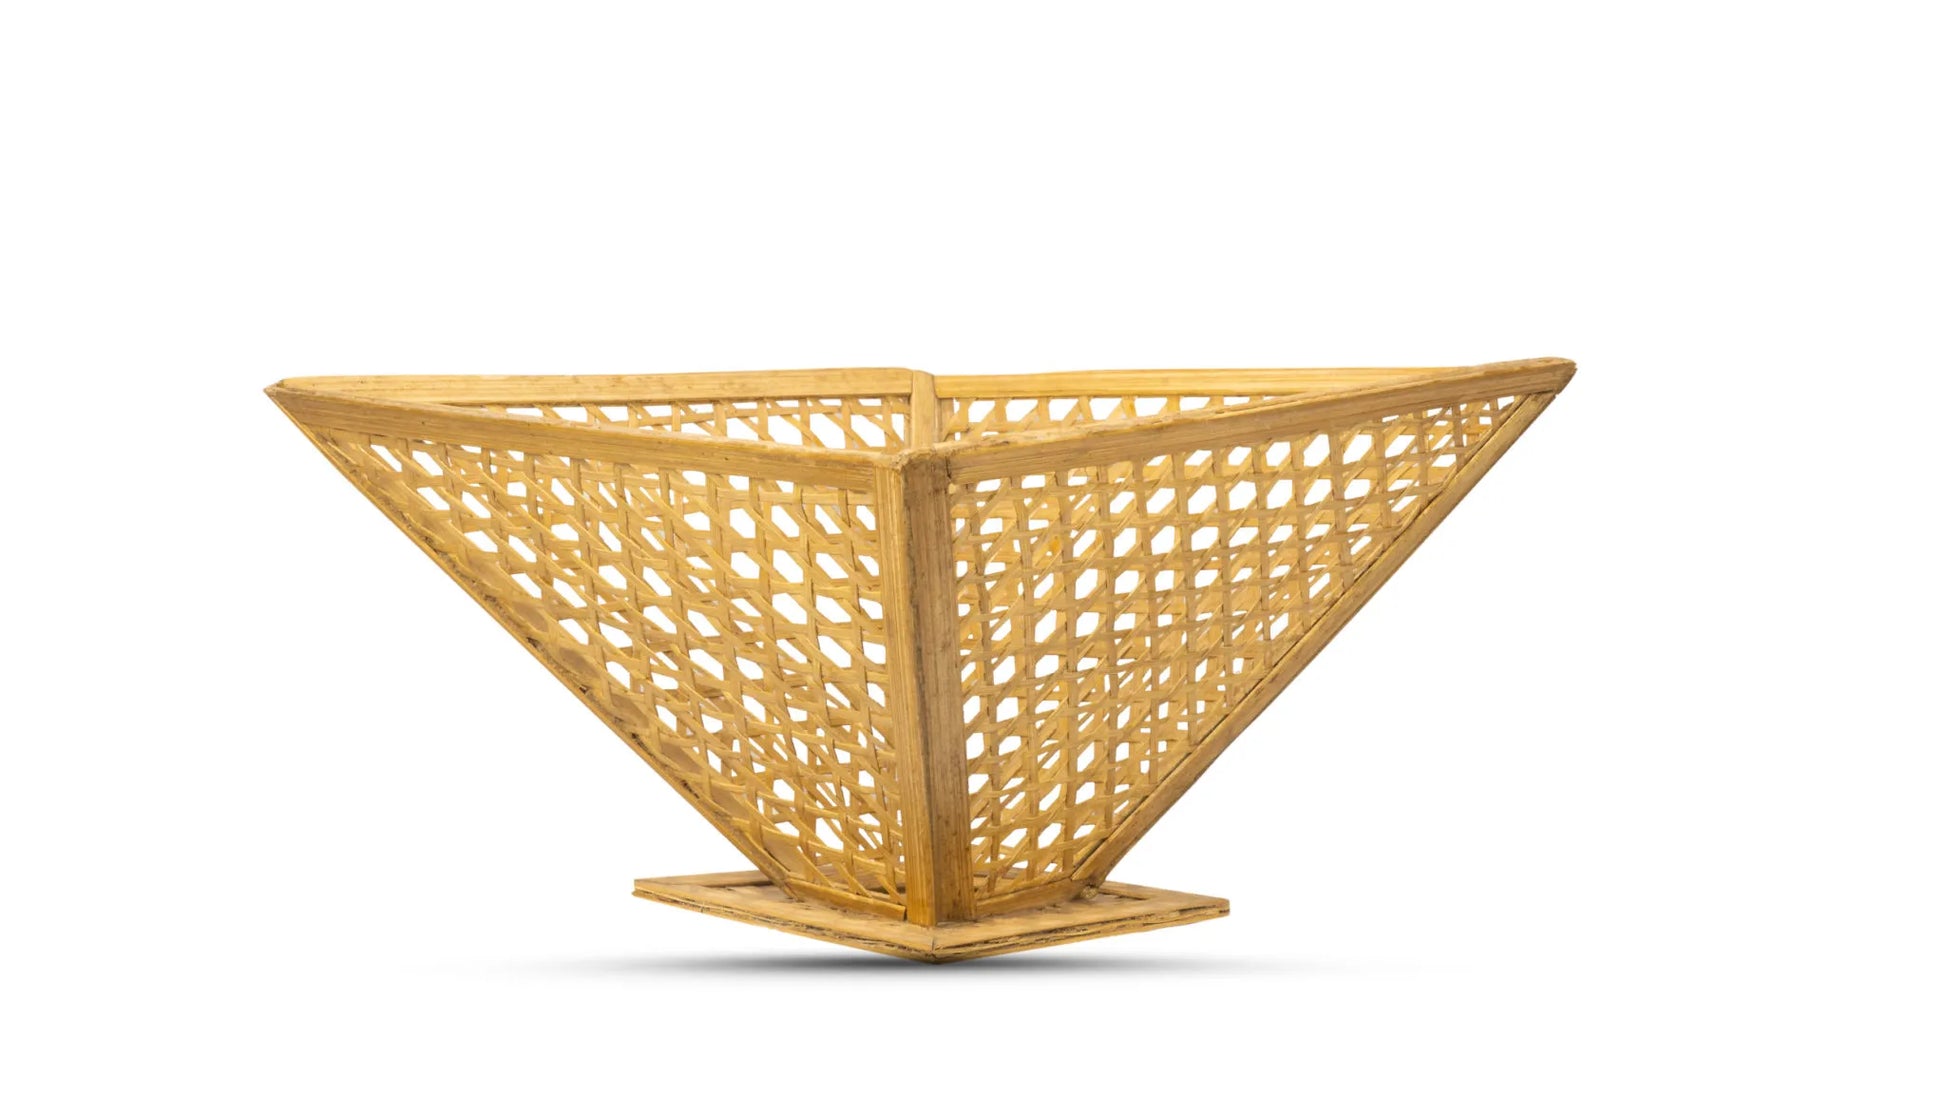 Handmade conical bamboo woven basket on white background